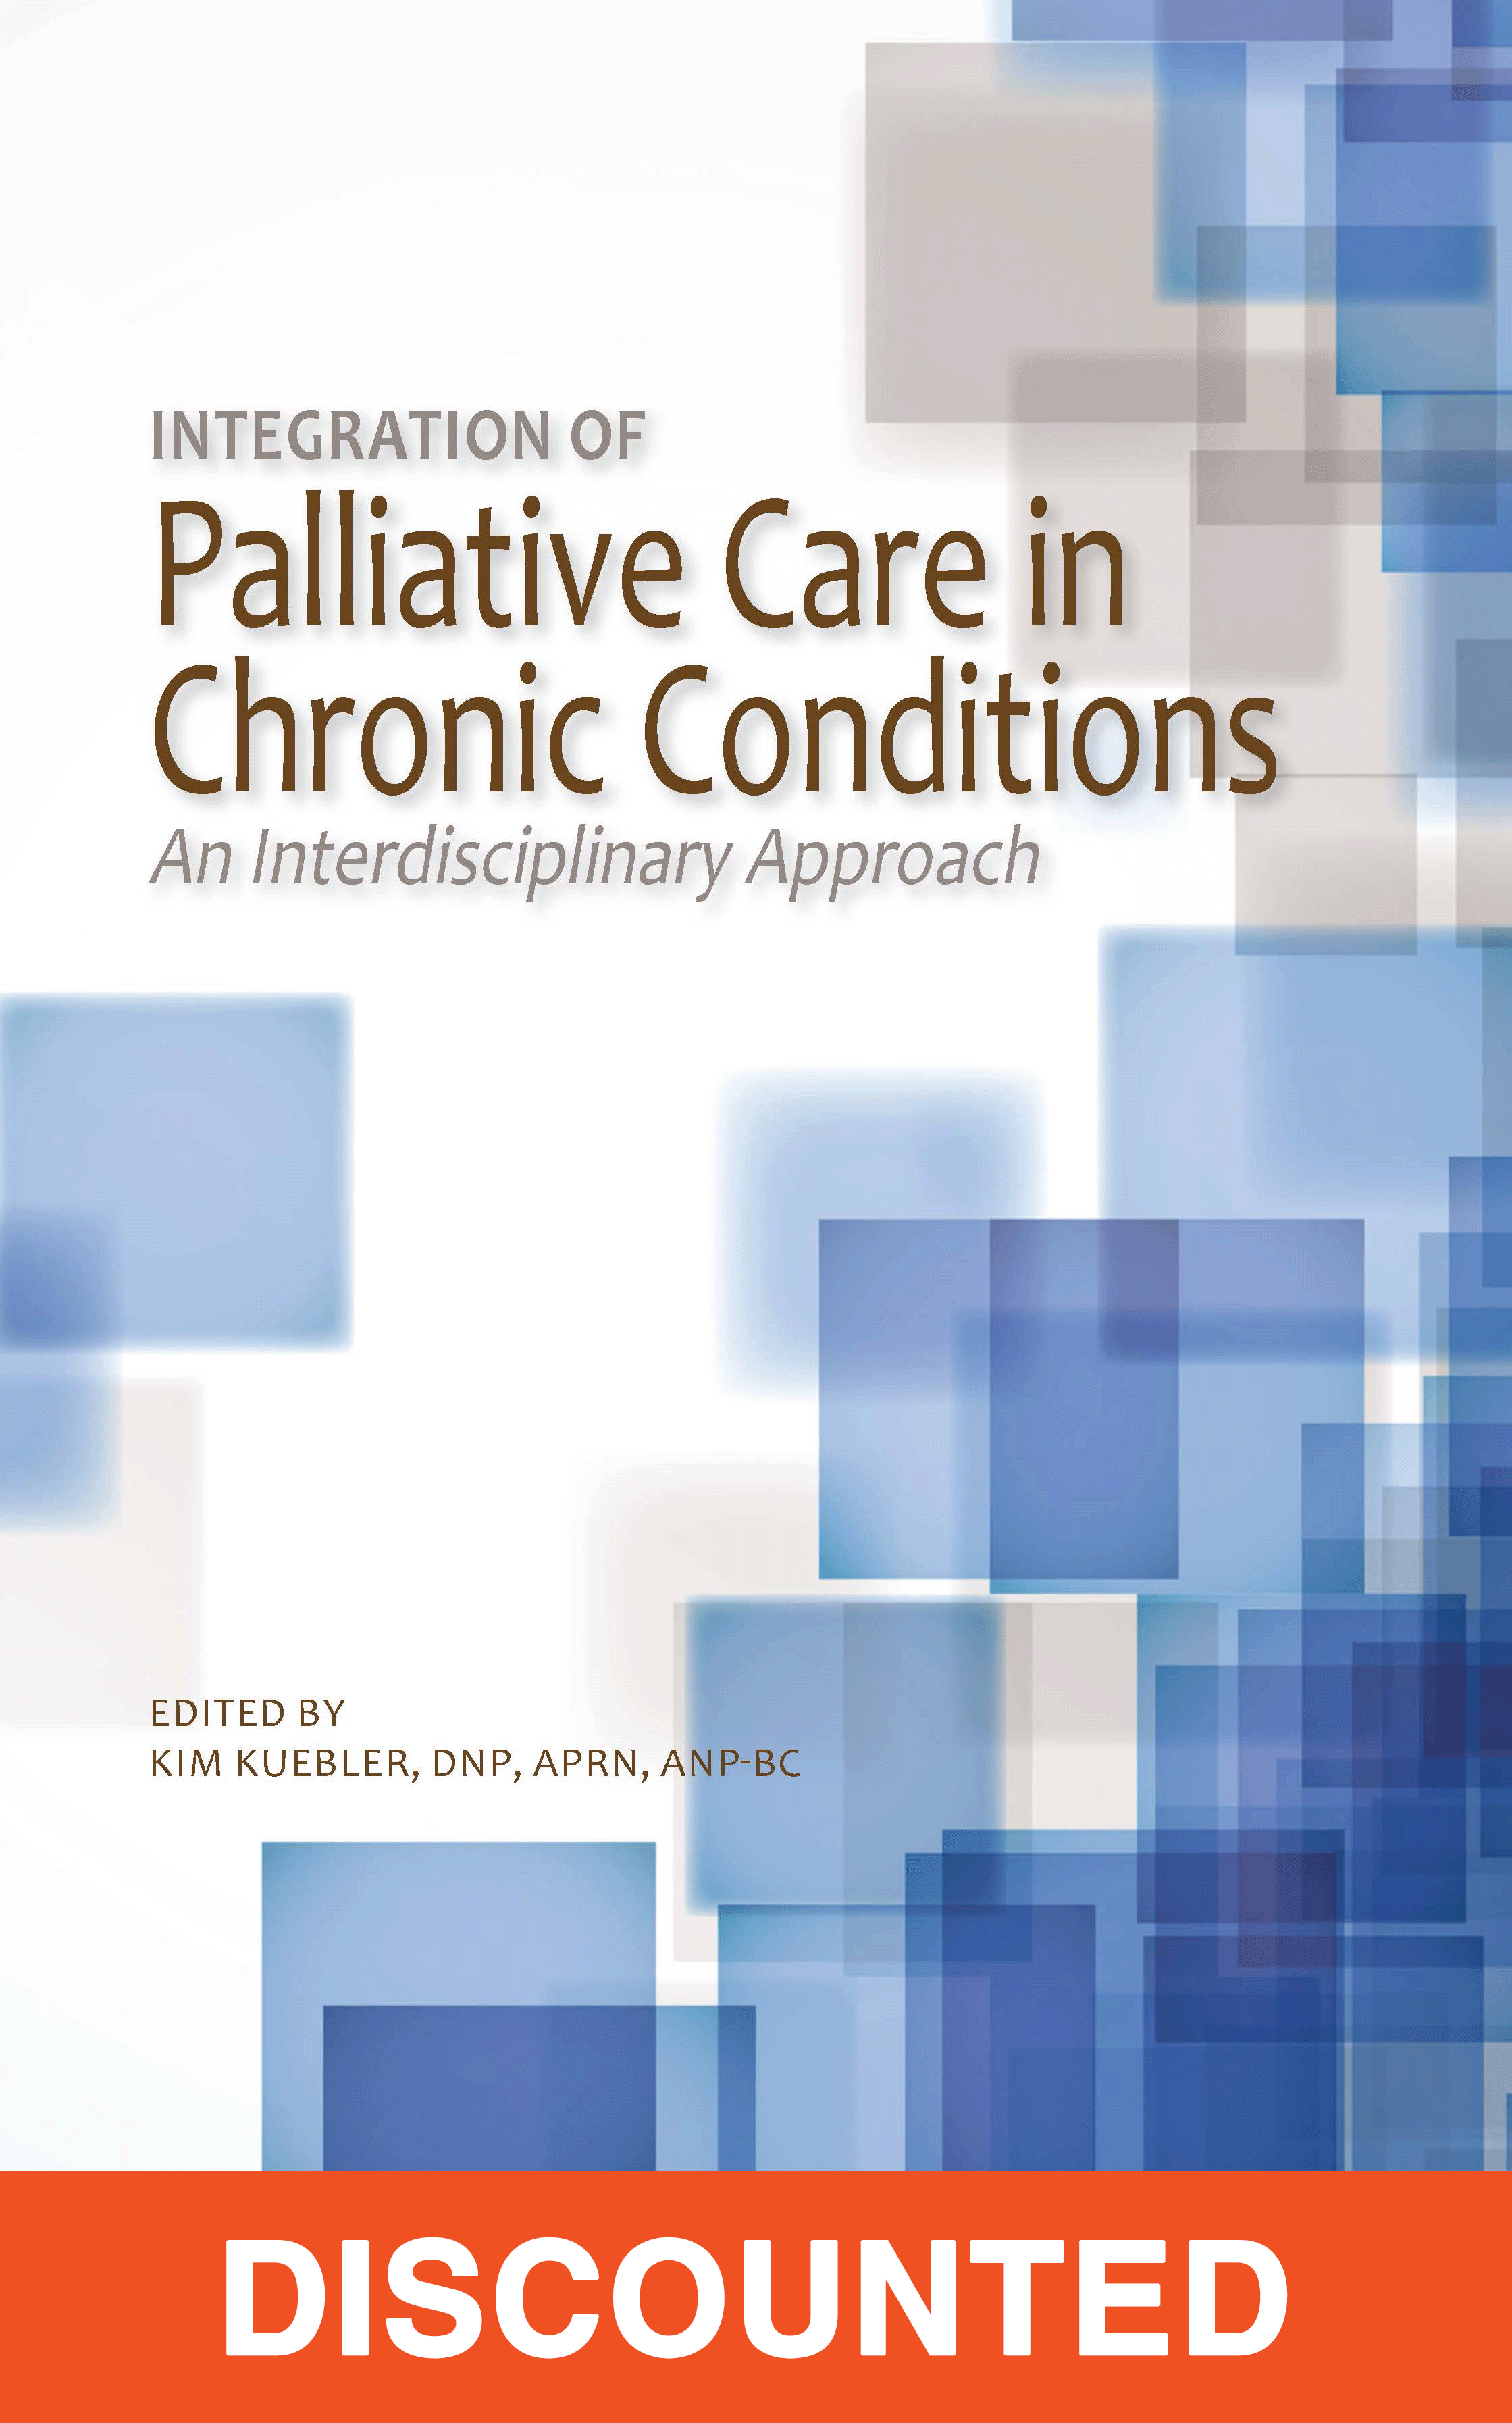 Integration of Palliative Care in Chronic Conditions: An Interdisciplinary Approach